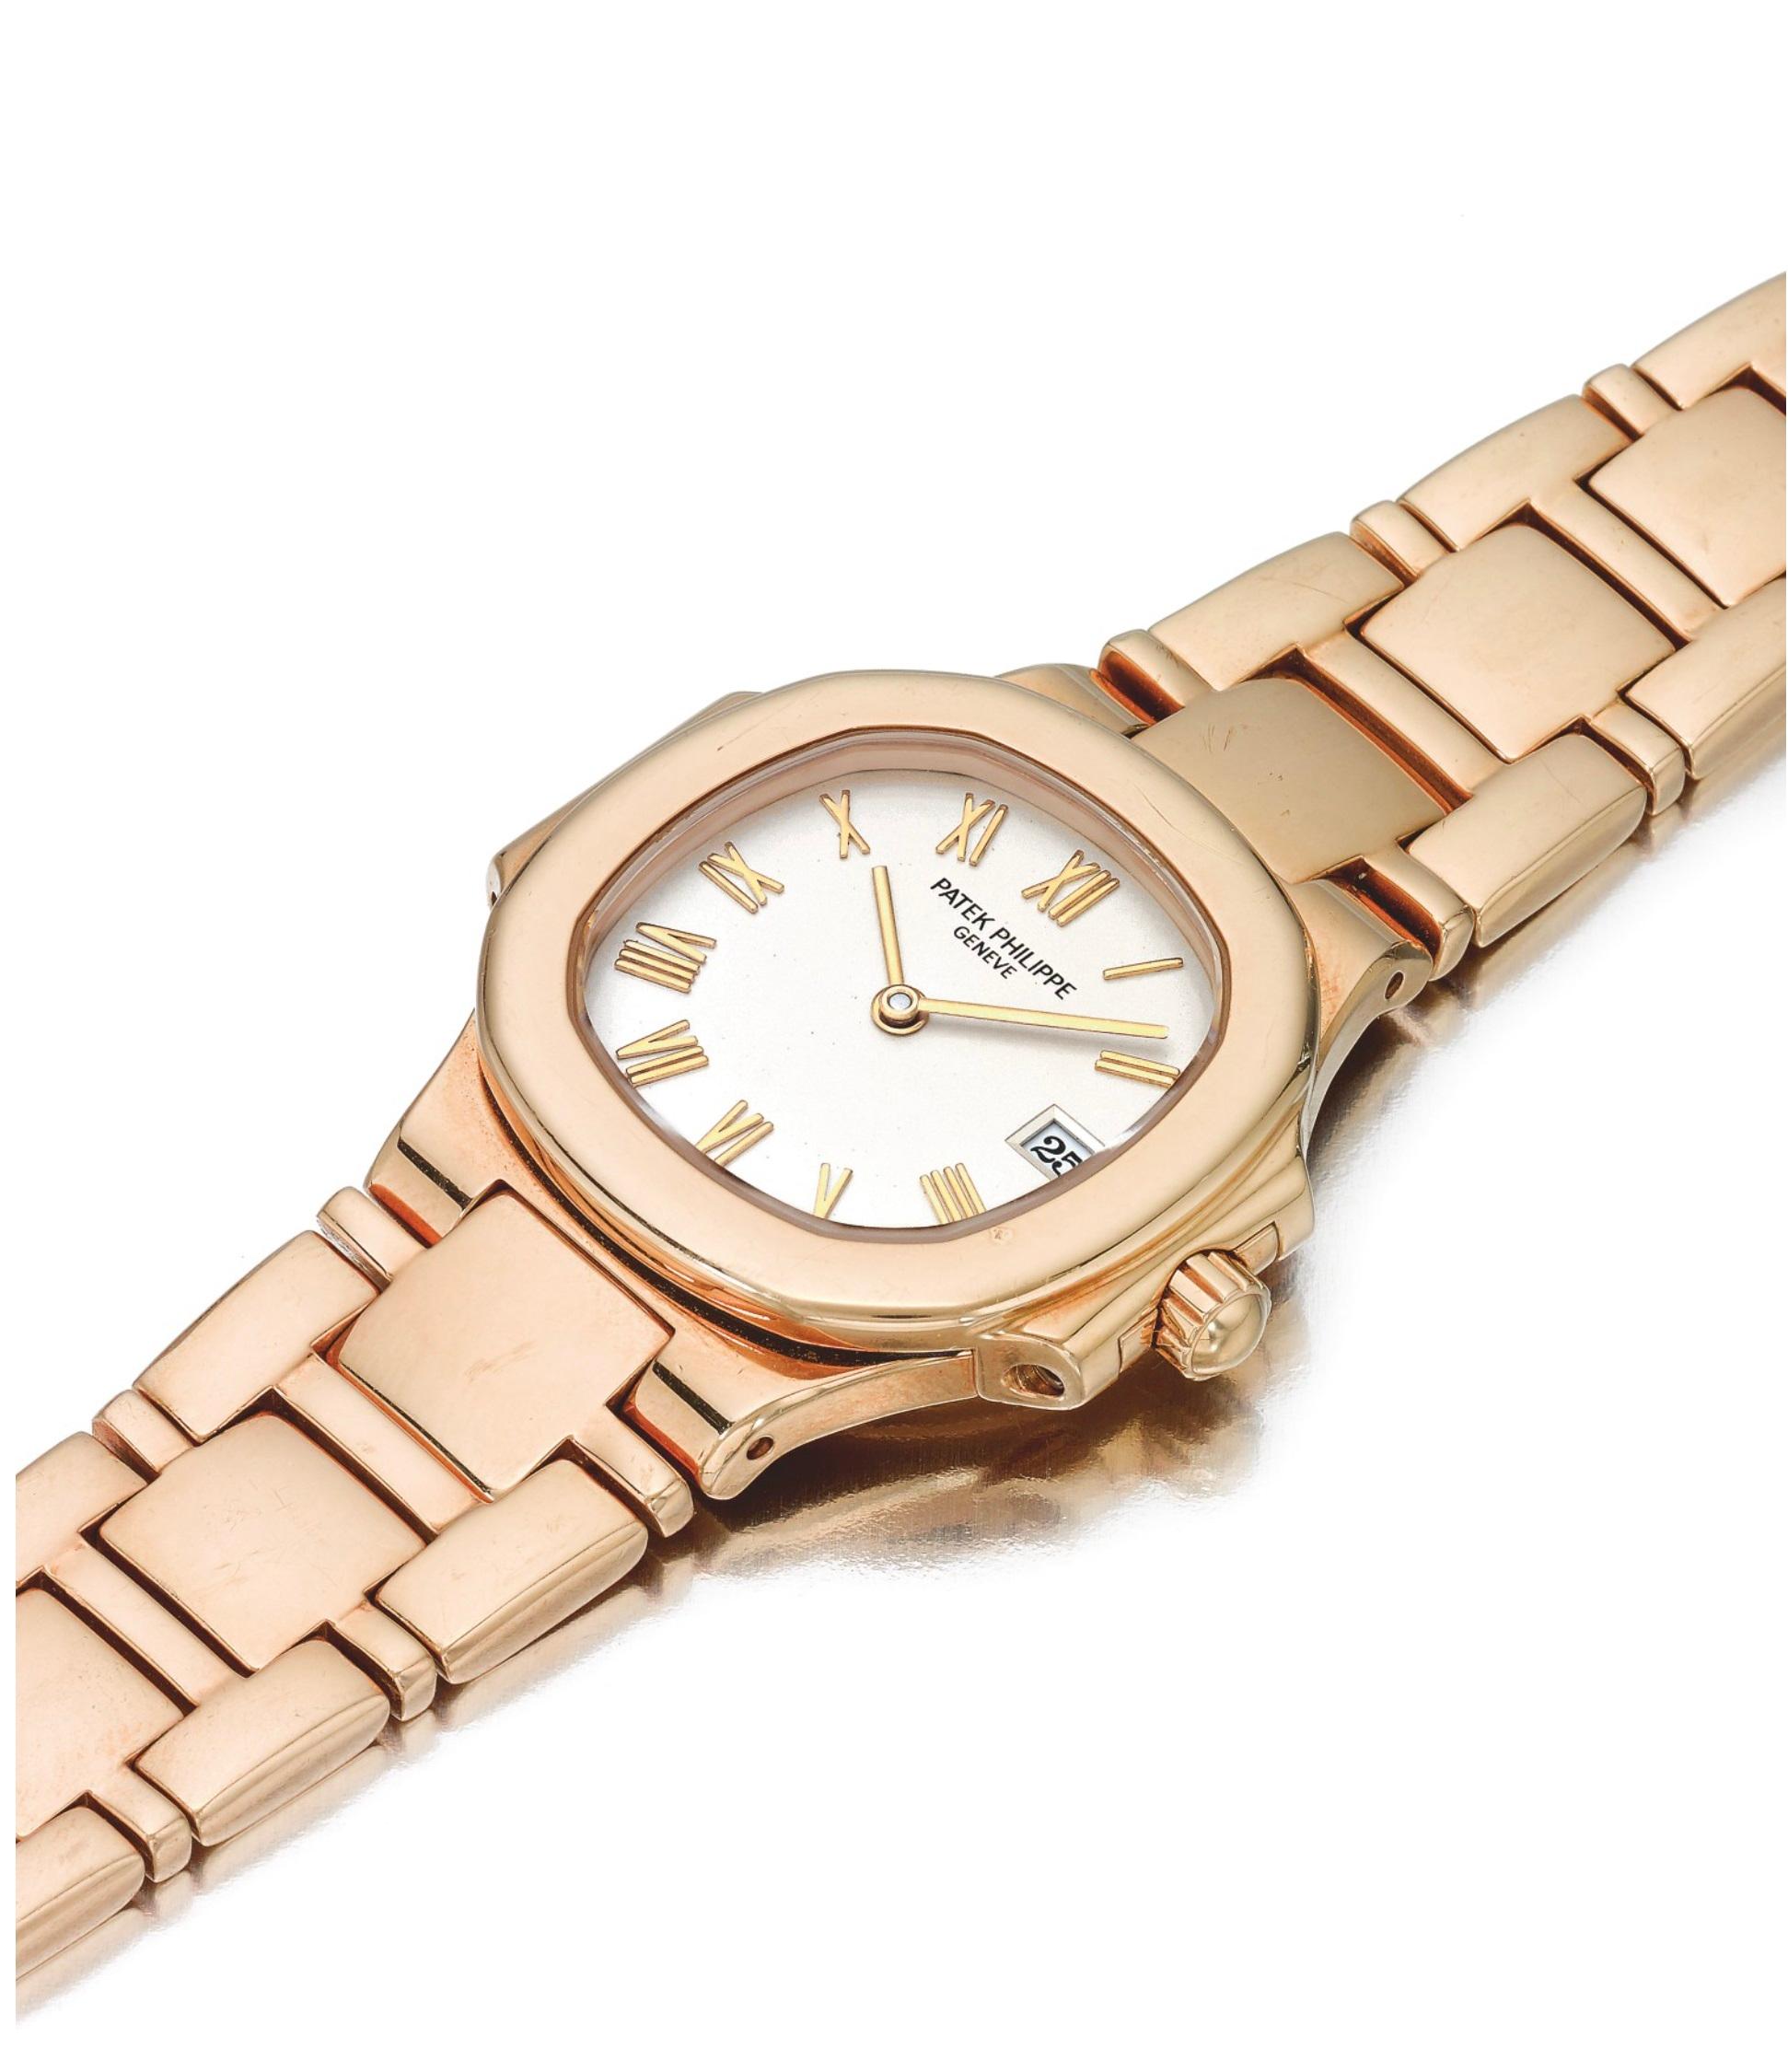 Patek Phillipe Ref 4700 Nautilus - yellow gold bracelet watch with date; made in 1993
Accompanied by document confirming the original date of sale - August 16, 1993
Dial: Ceramic white
Caliber: cal. E19C quartz, 7 jewels 
Movement number: